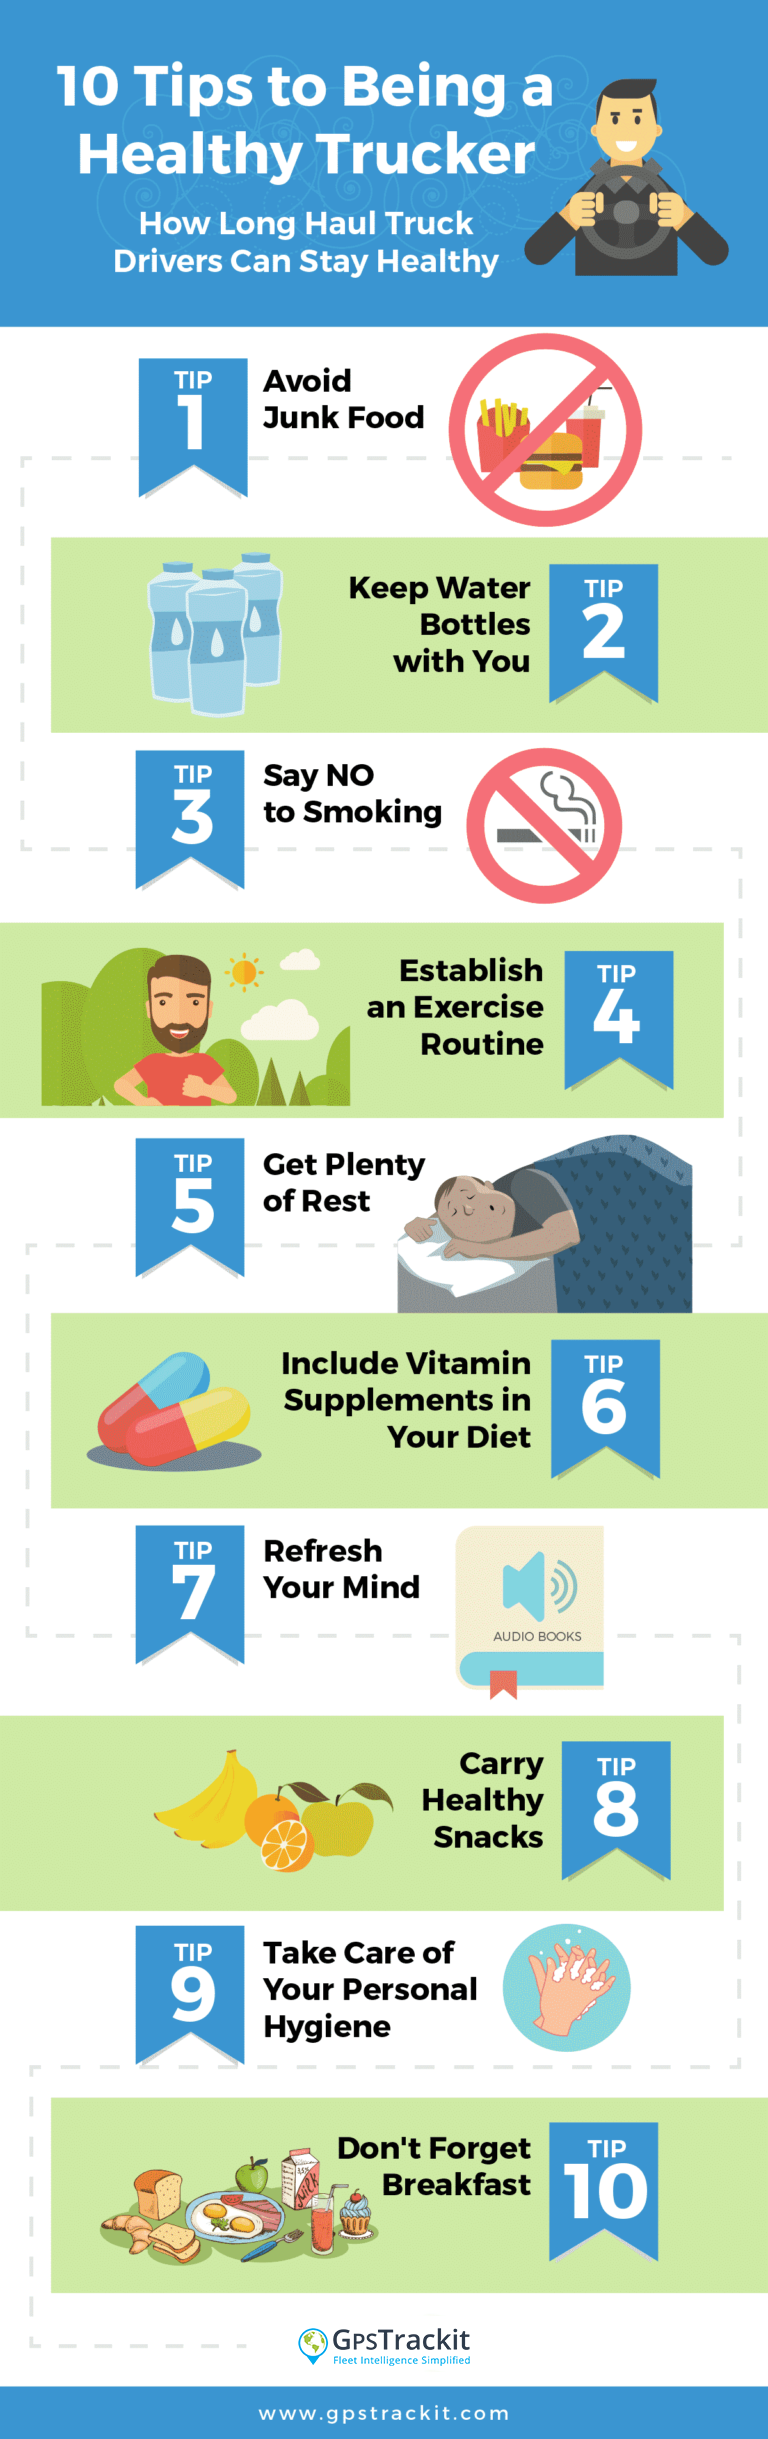 10 Tips to be a healthy trucker infographic